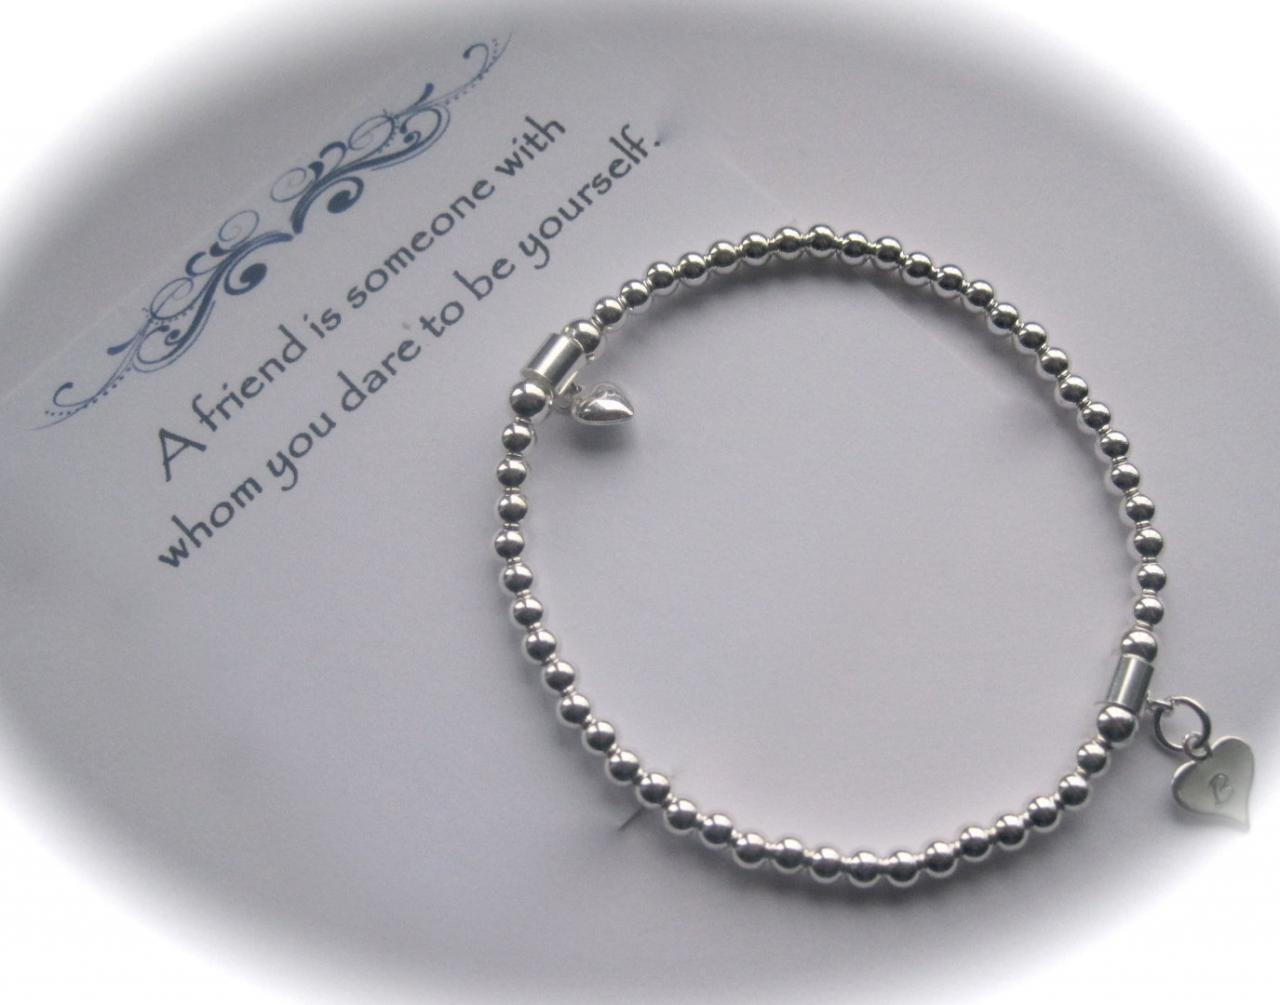 Serenity Friend - Sterling Silver puffed heart and stamped heart charm Stretch Bead Bracelet